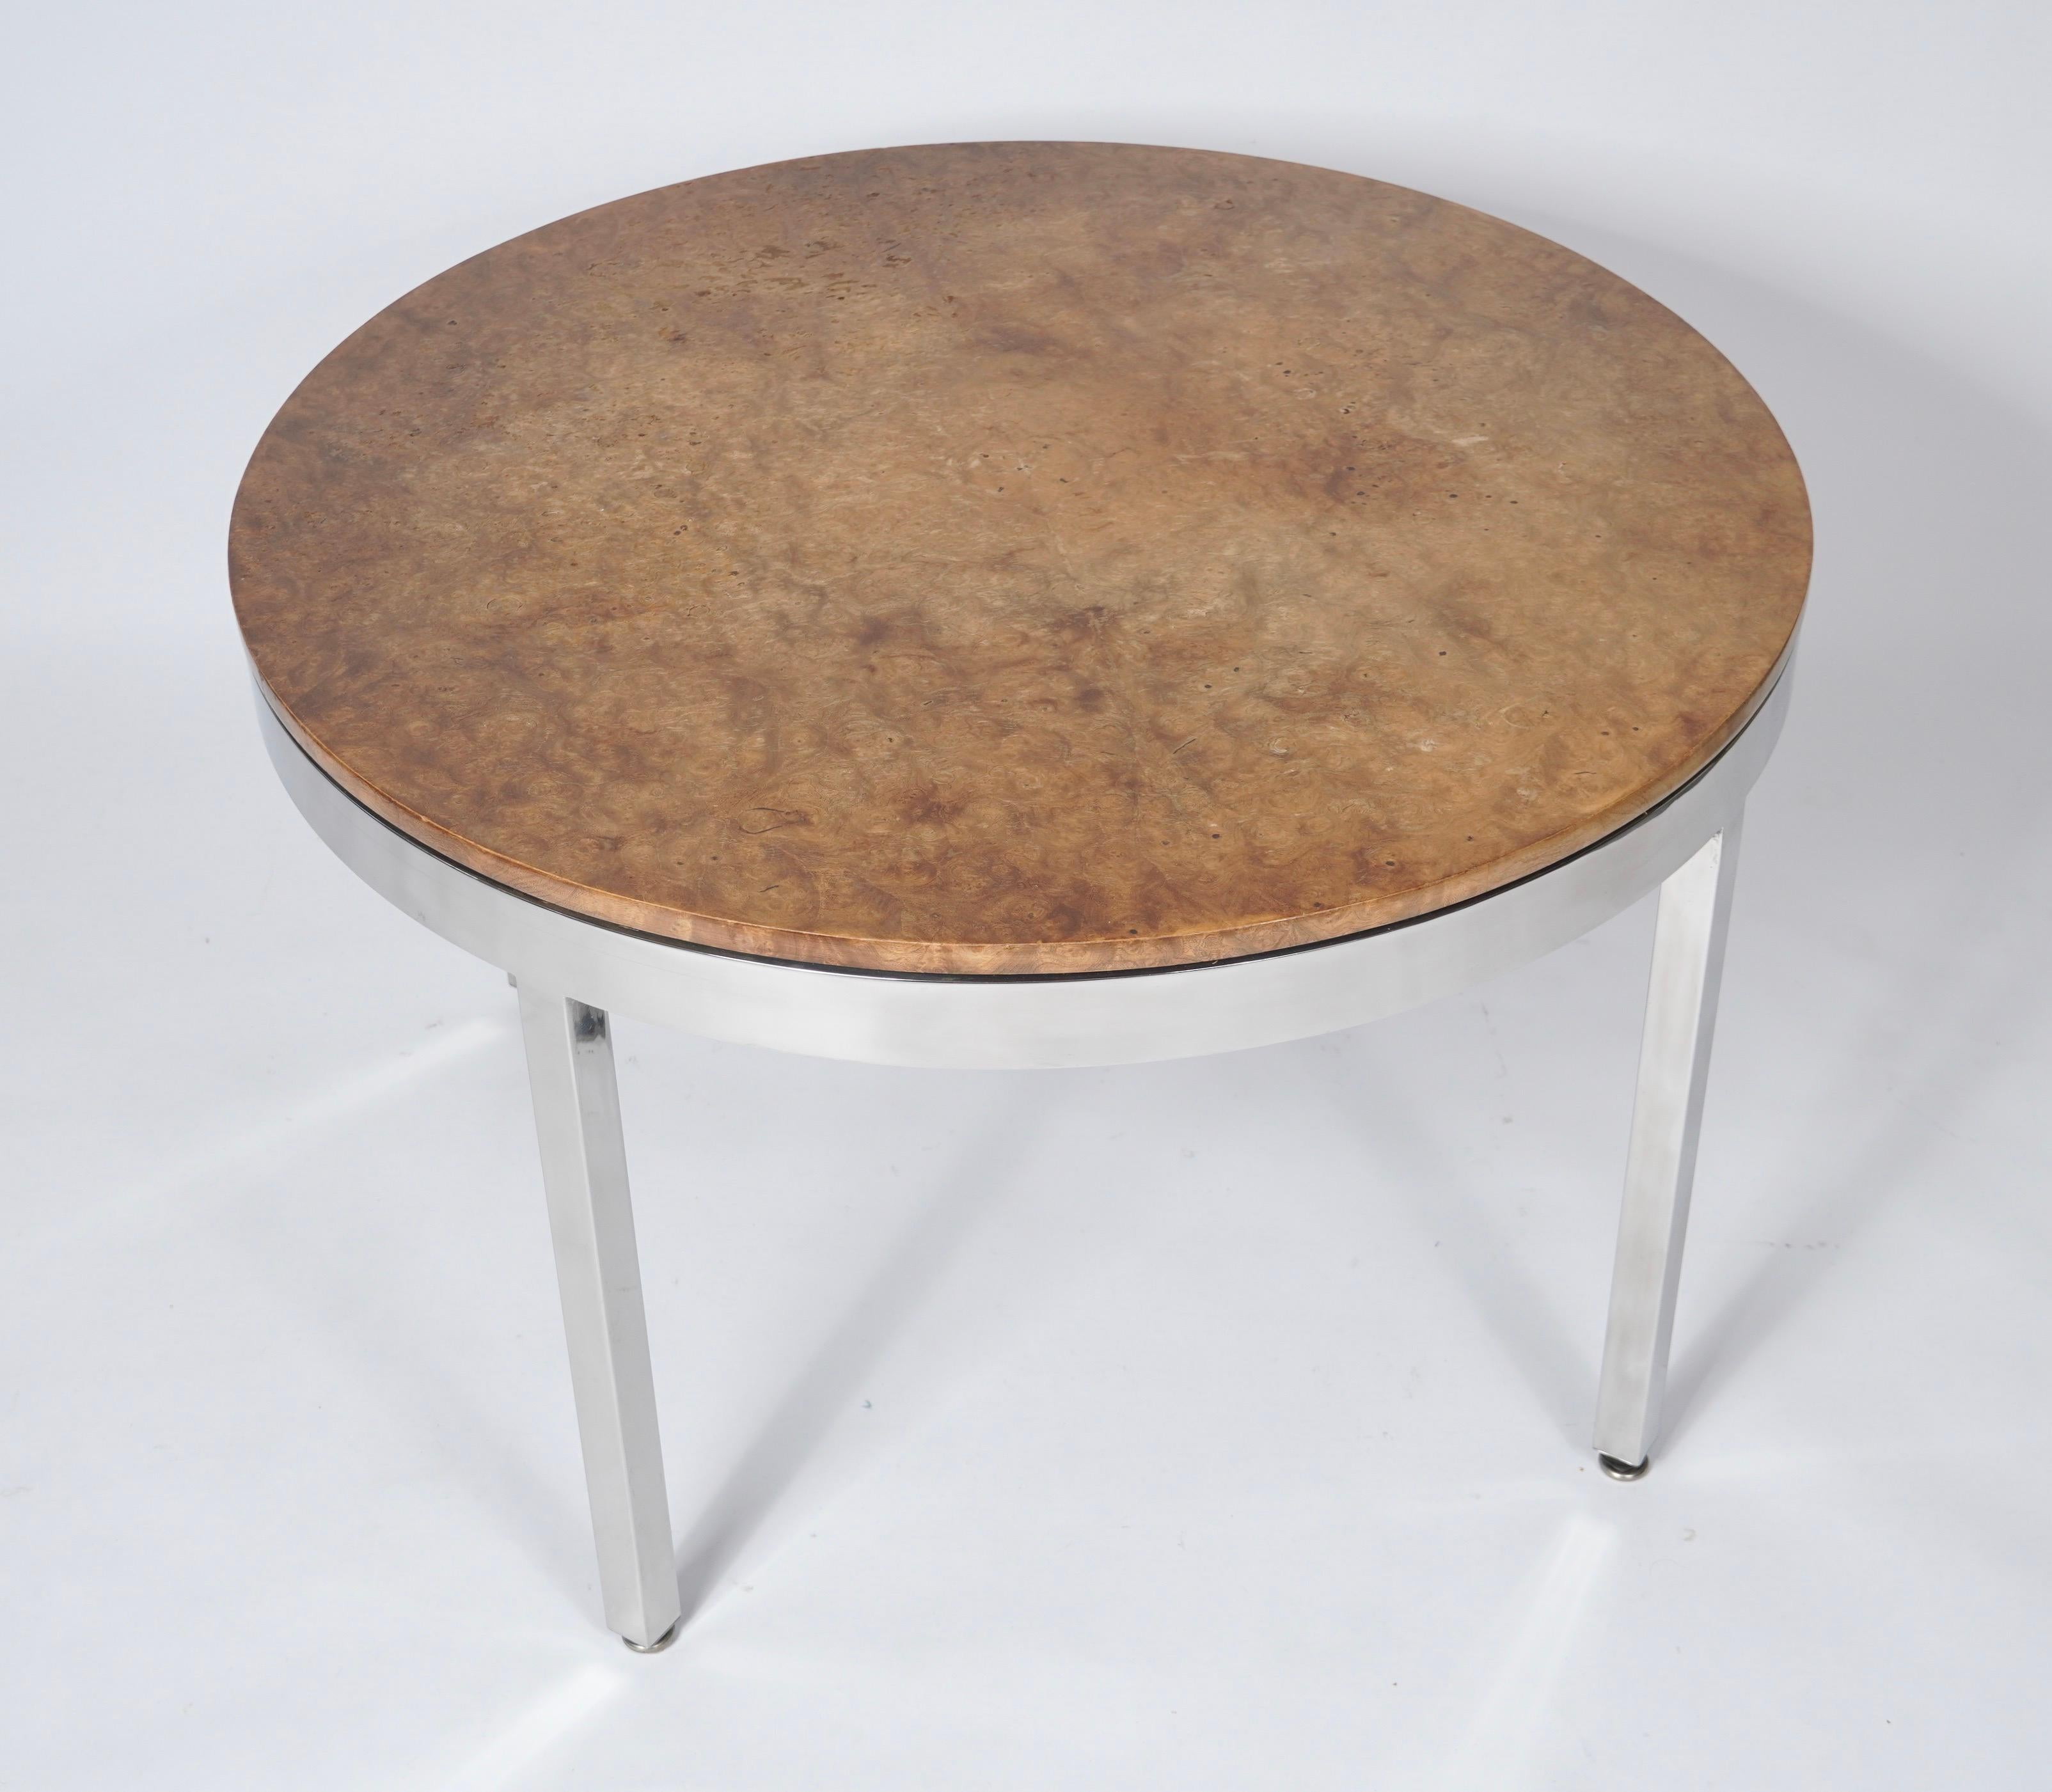 1970s Round chrome and burl dining table, quarter panels of burl on the round top with squared robust  legs. A sleek modern design from the period.